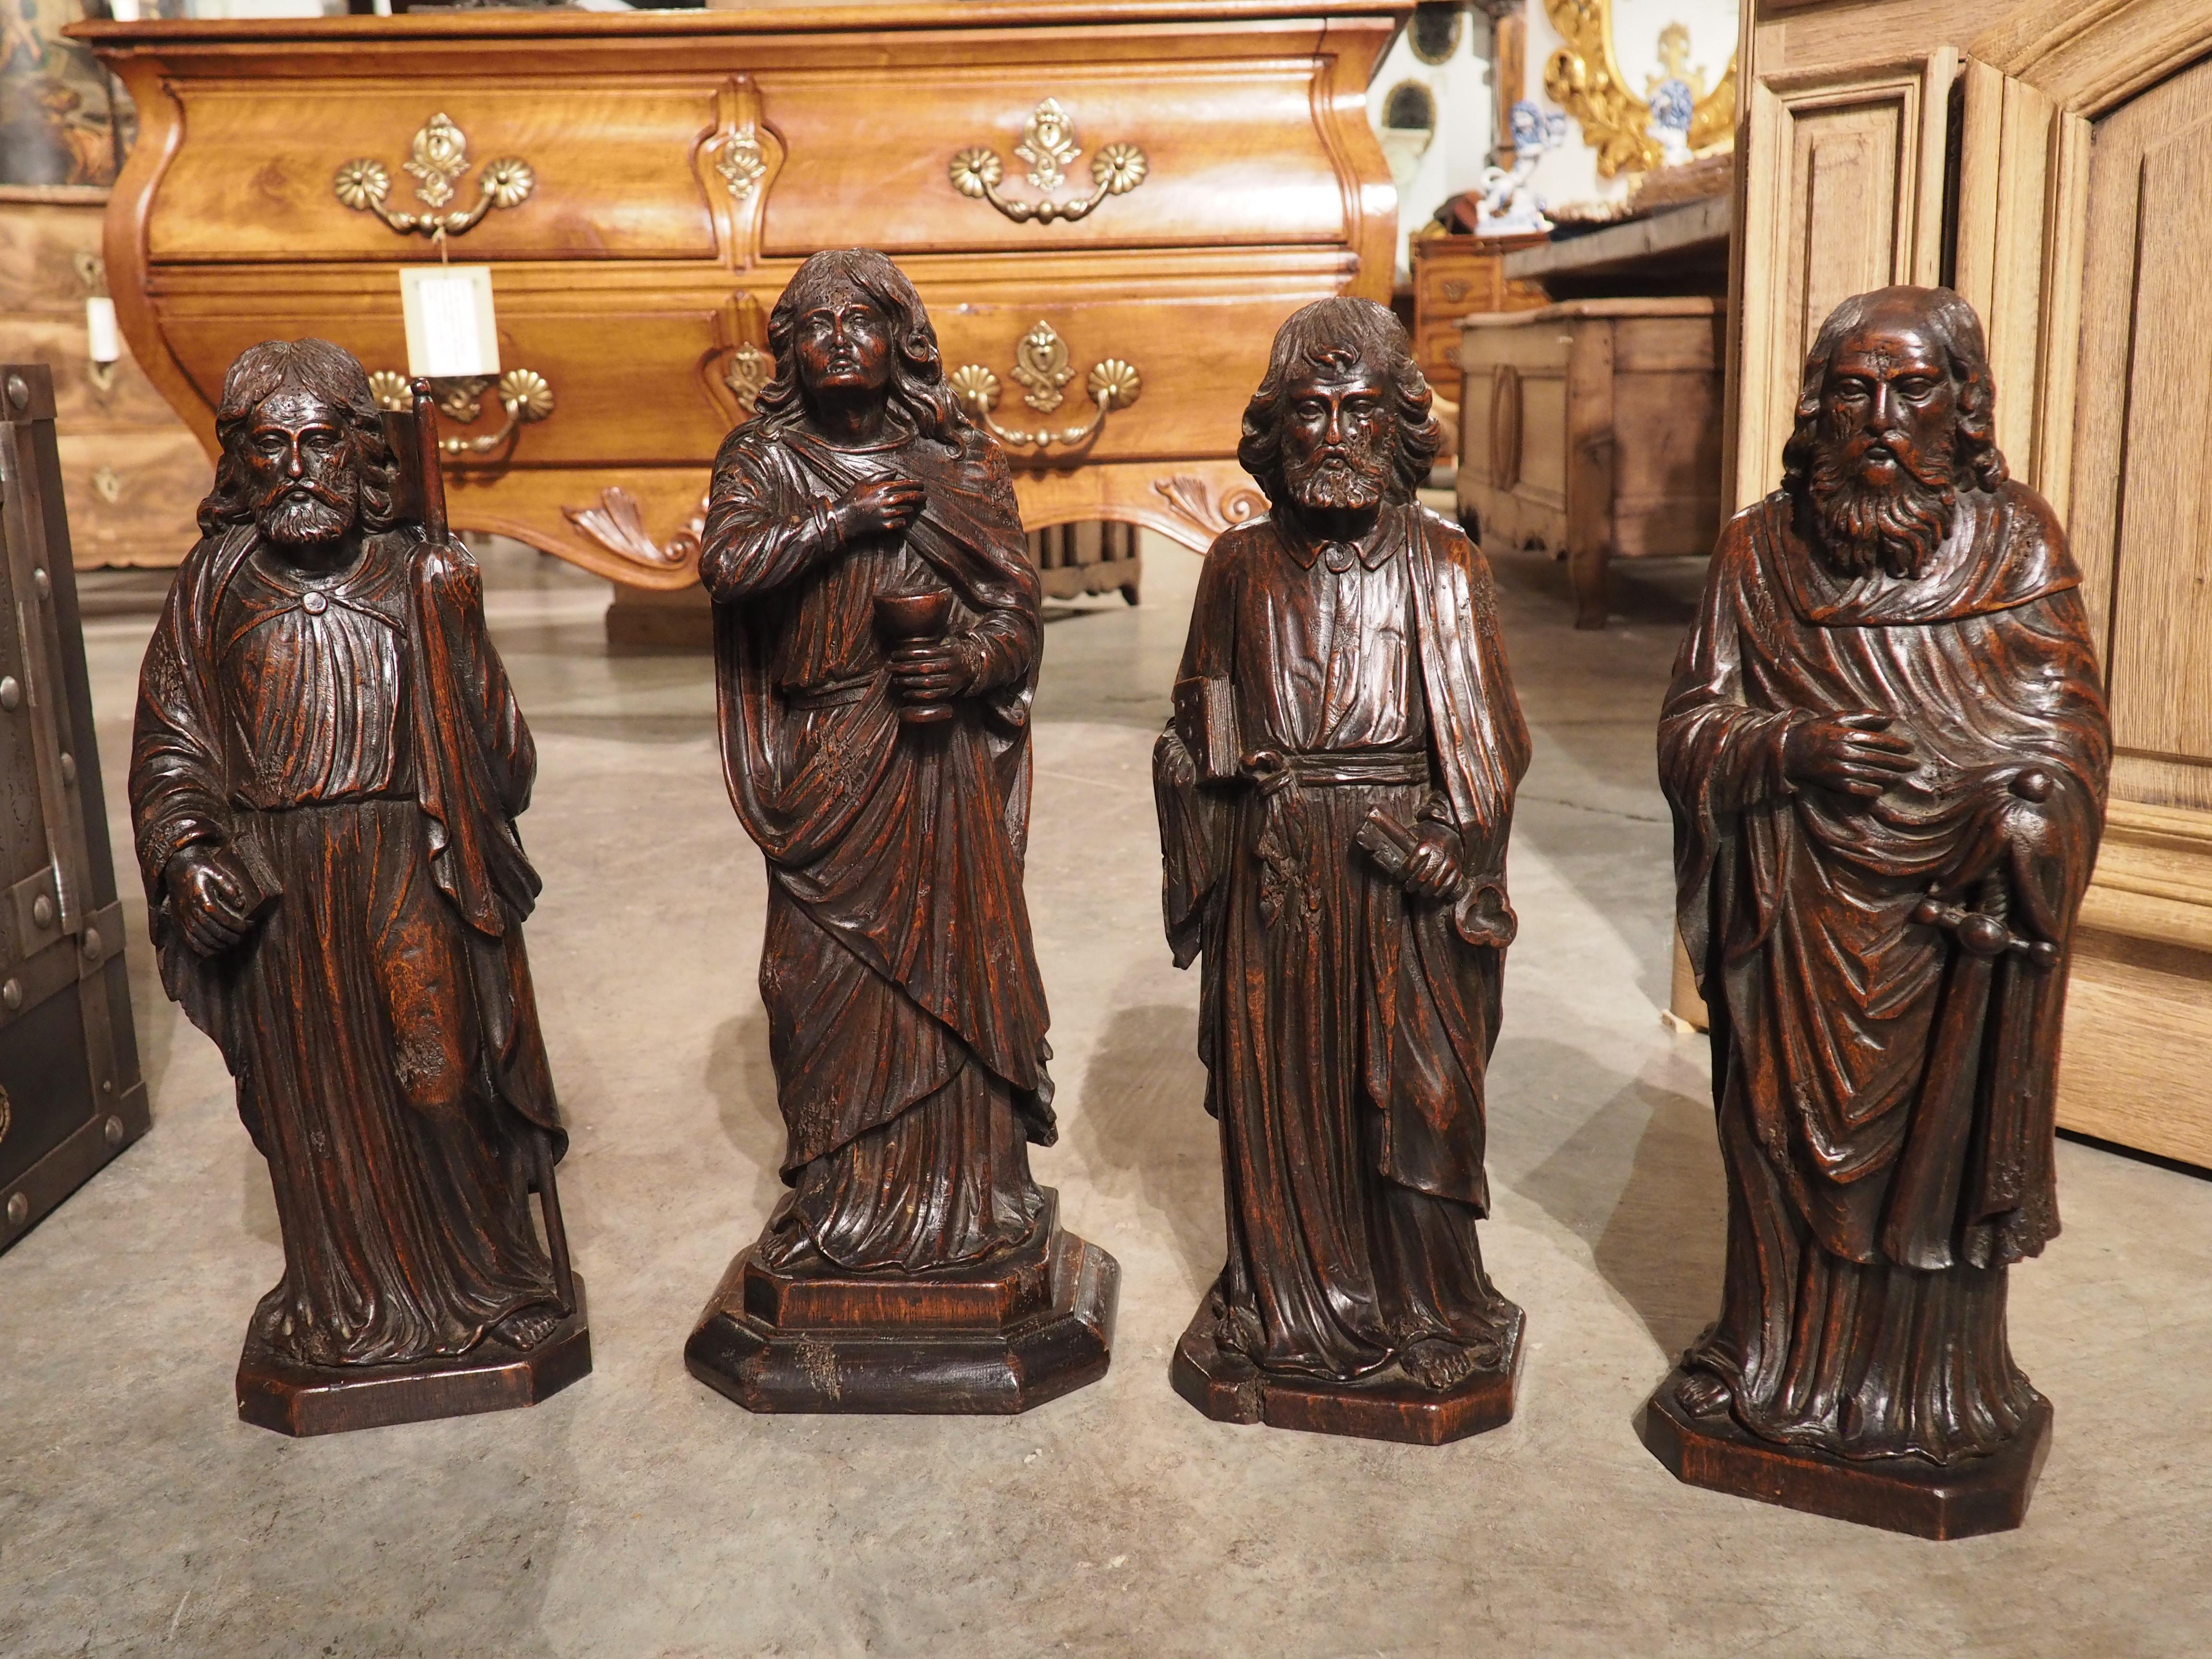 Hand-carved in oak, circa 1800, these sculptures depict arguably the most important apostles: James, John, Peter, and Paul. All of the figures are distinctly different, although they share some commonalities, such as they are all barefoot and clad